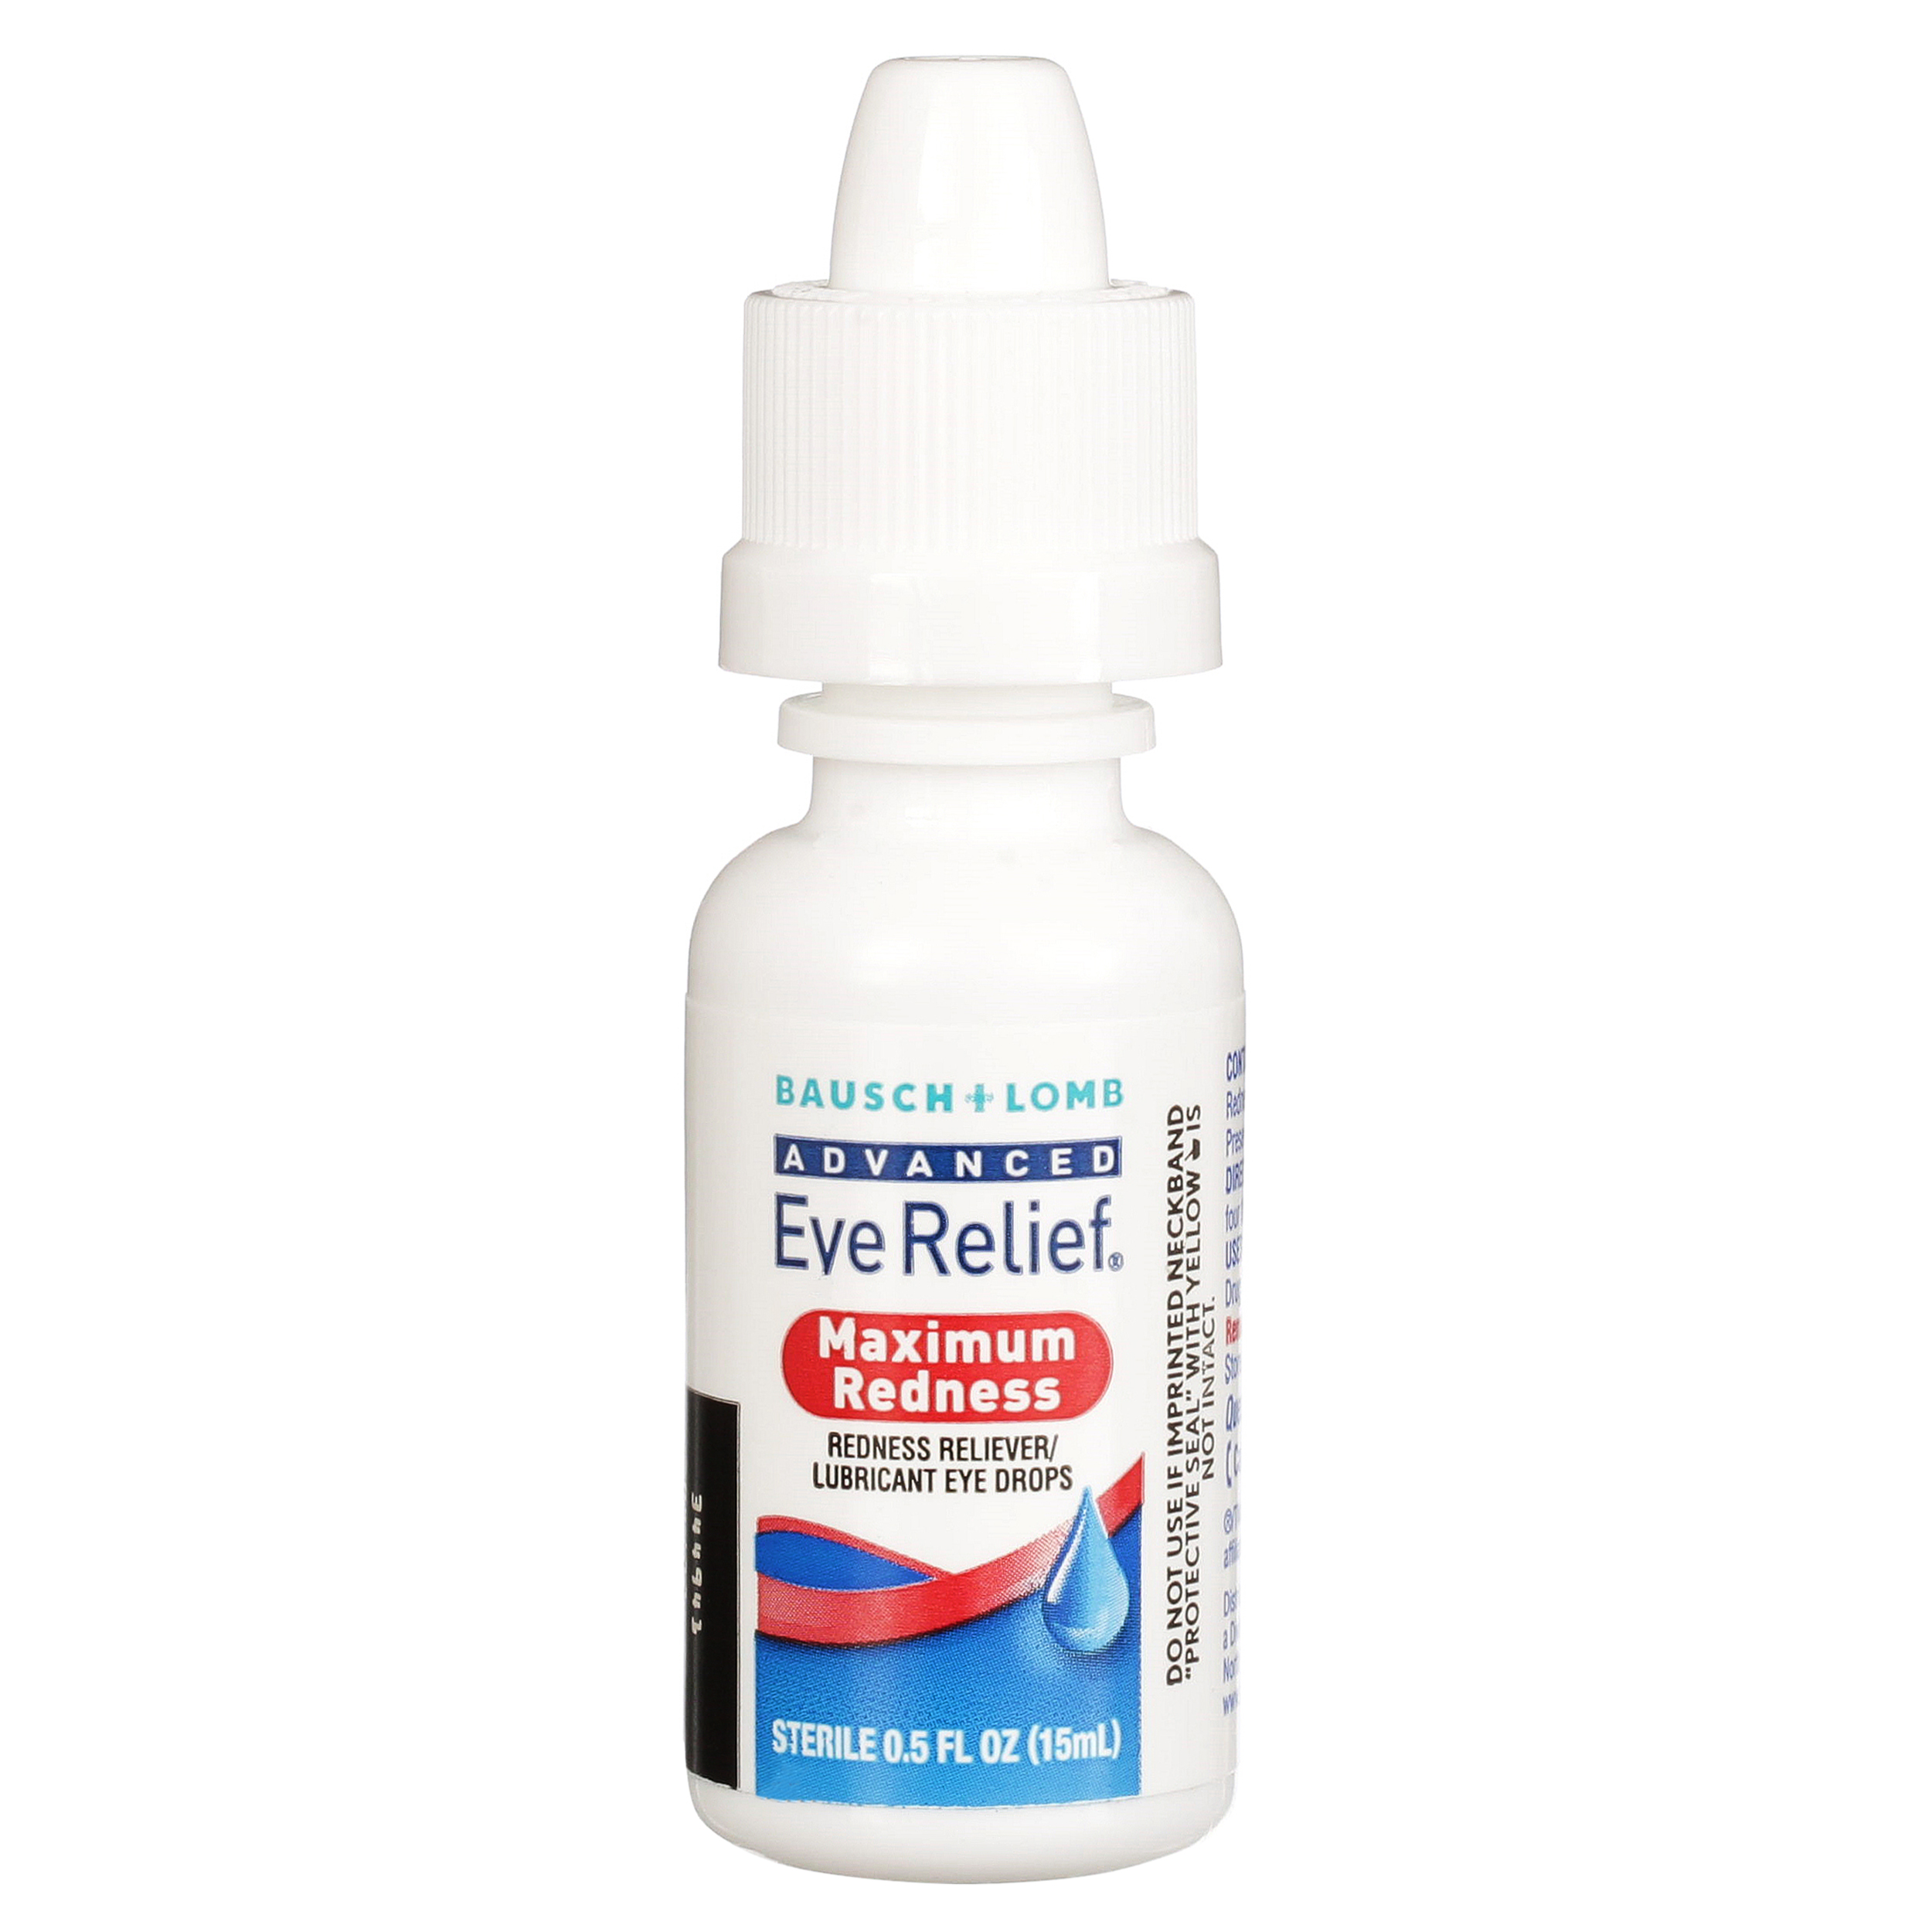 Bausch & Lomb Advanced Eye Relief Maximum Relief Lubricant/Redness Reliever Eye Drops, .5 oz - image 4 of 8